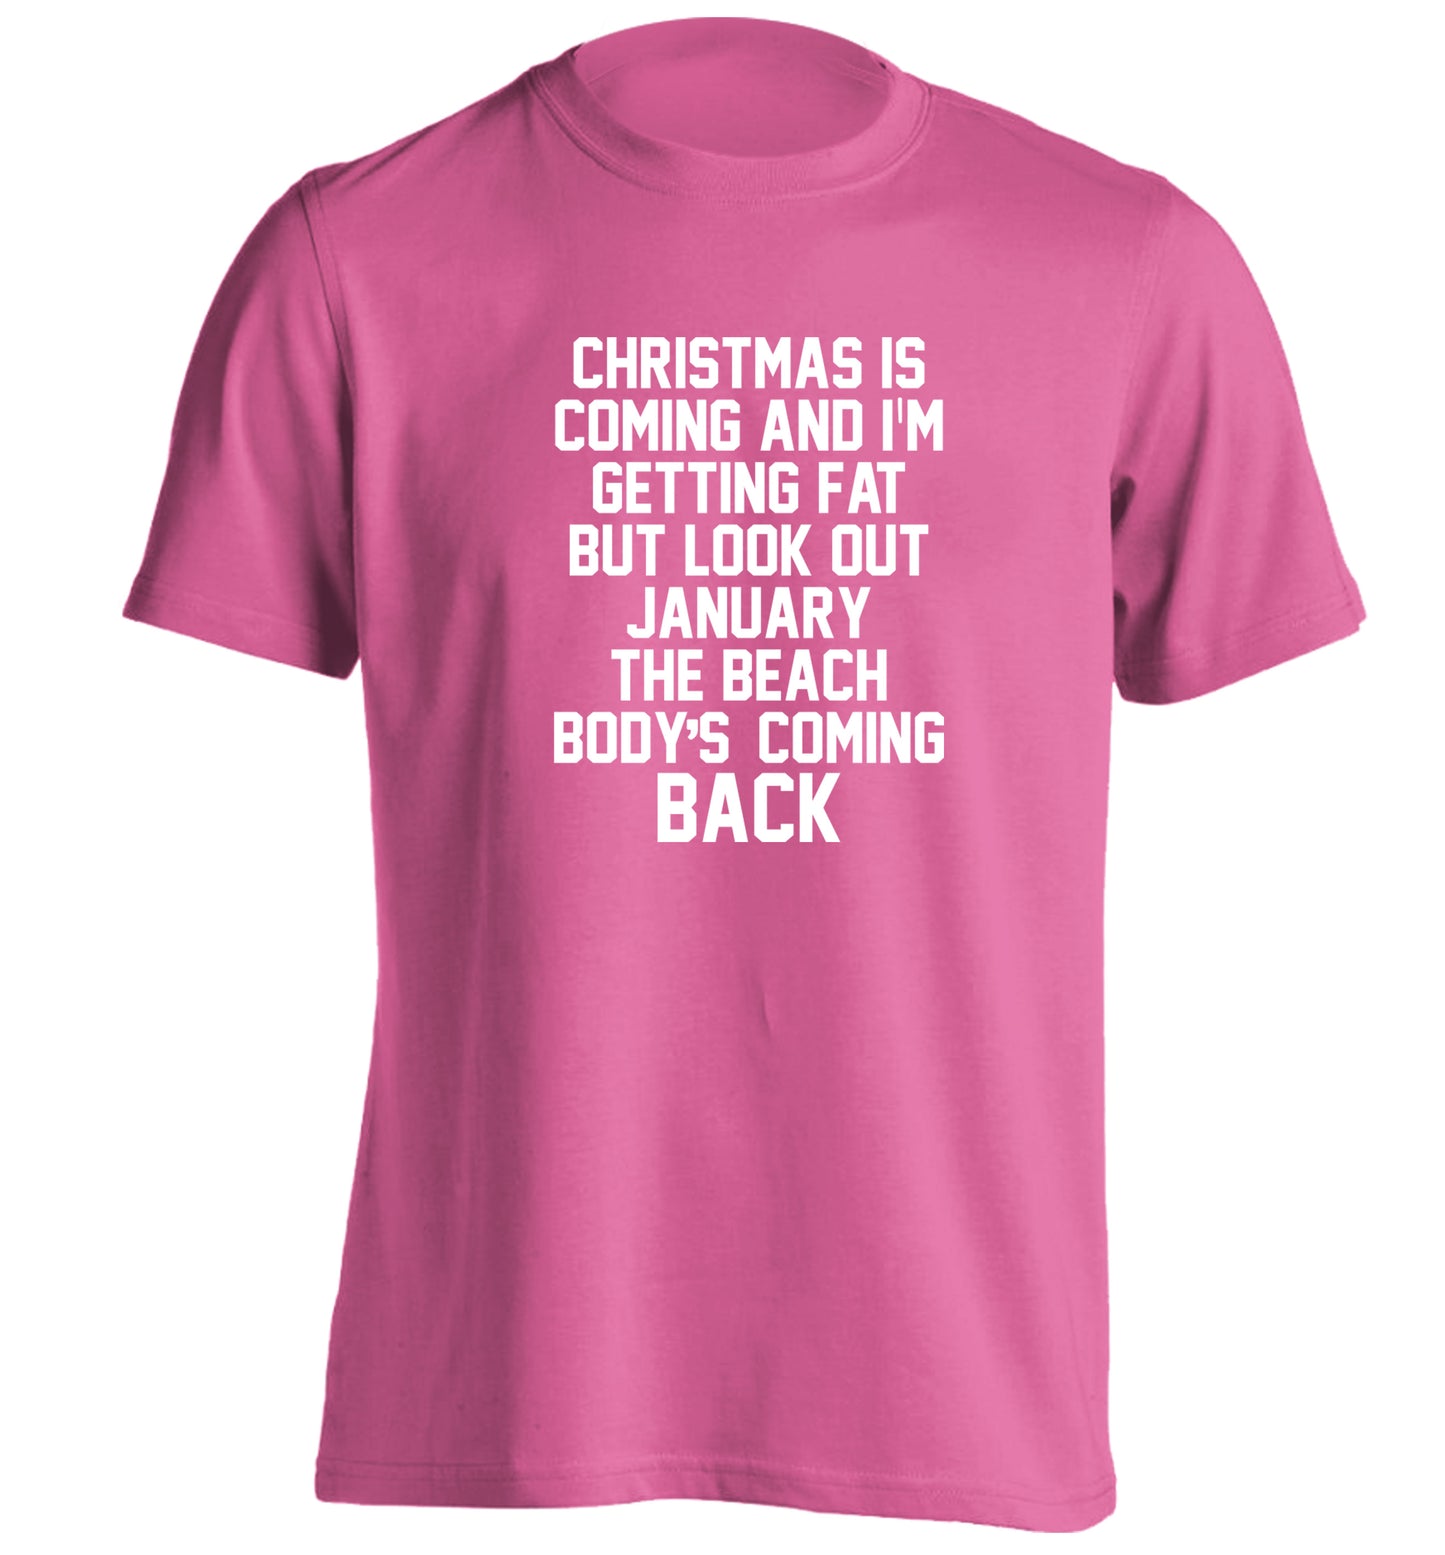 Christmas is coming and I'm getting fat but look out January the beach body's coming back! adults unisex pink Tshirt 2XL